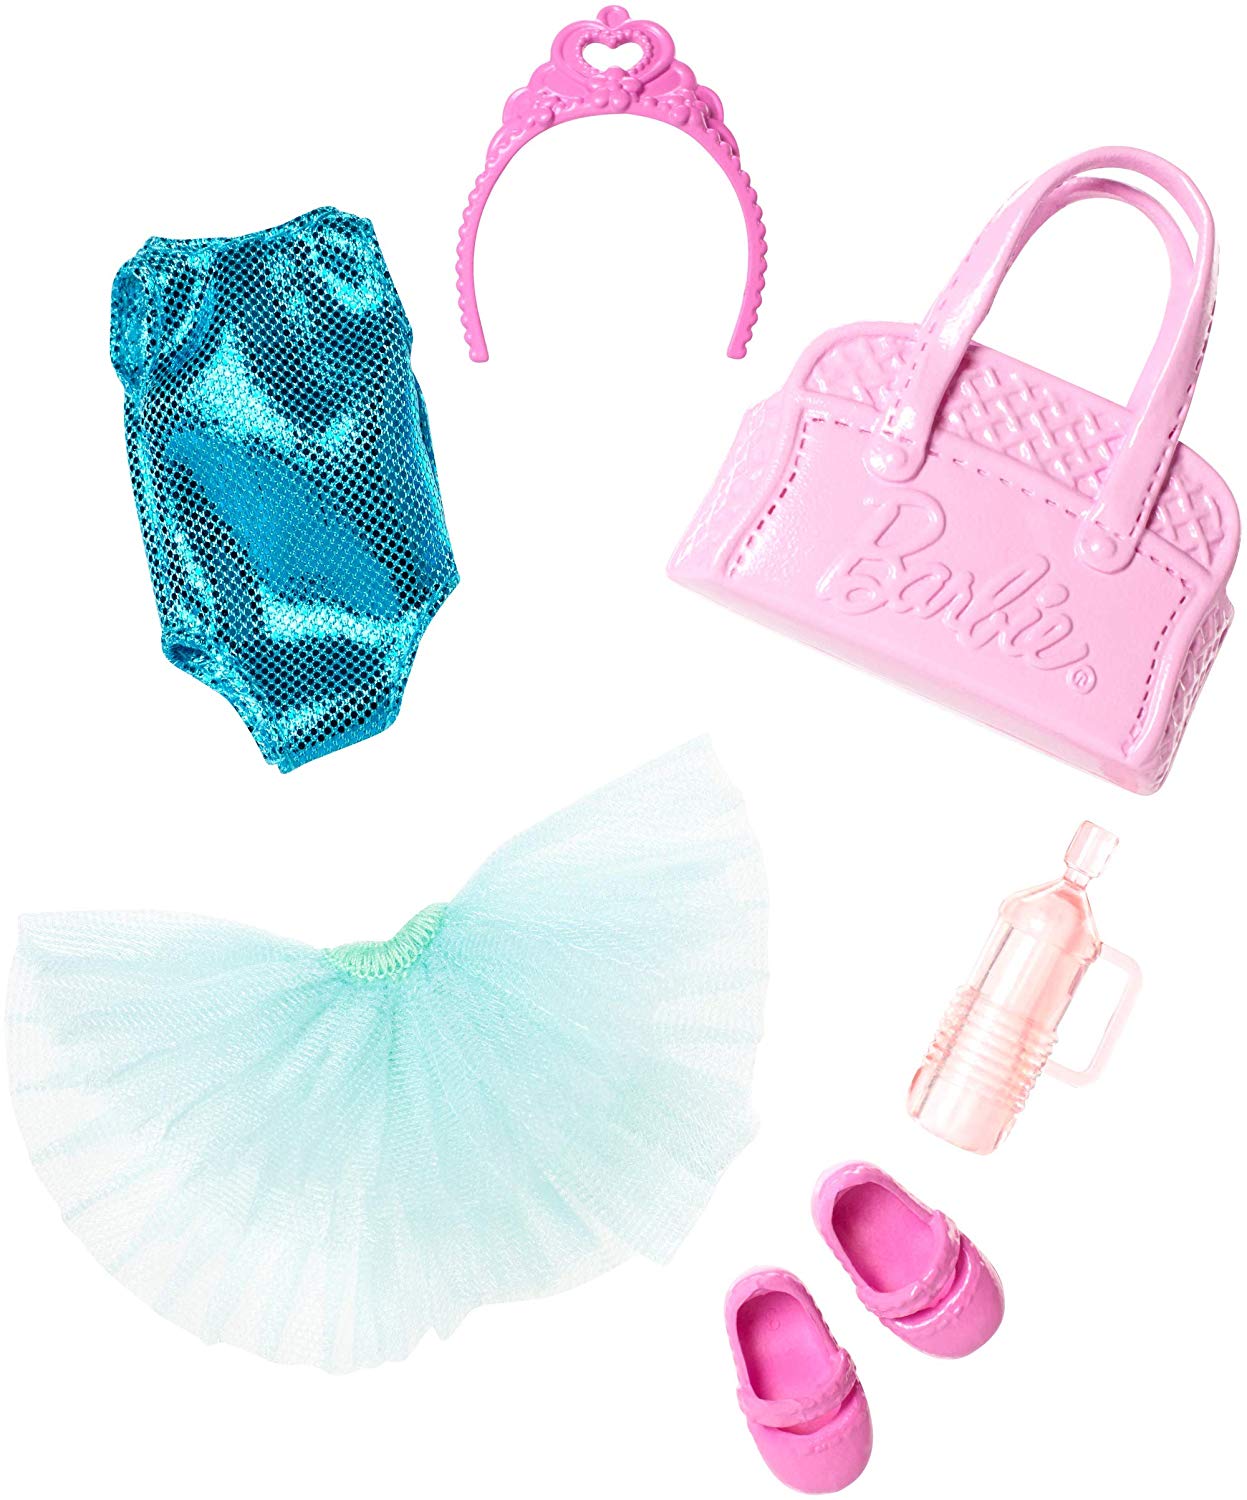 barbie ballerina outfit